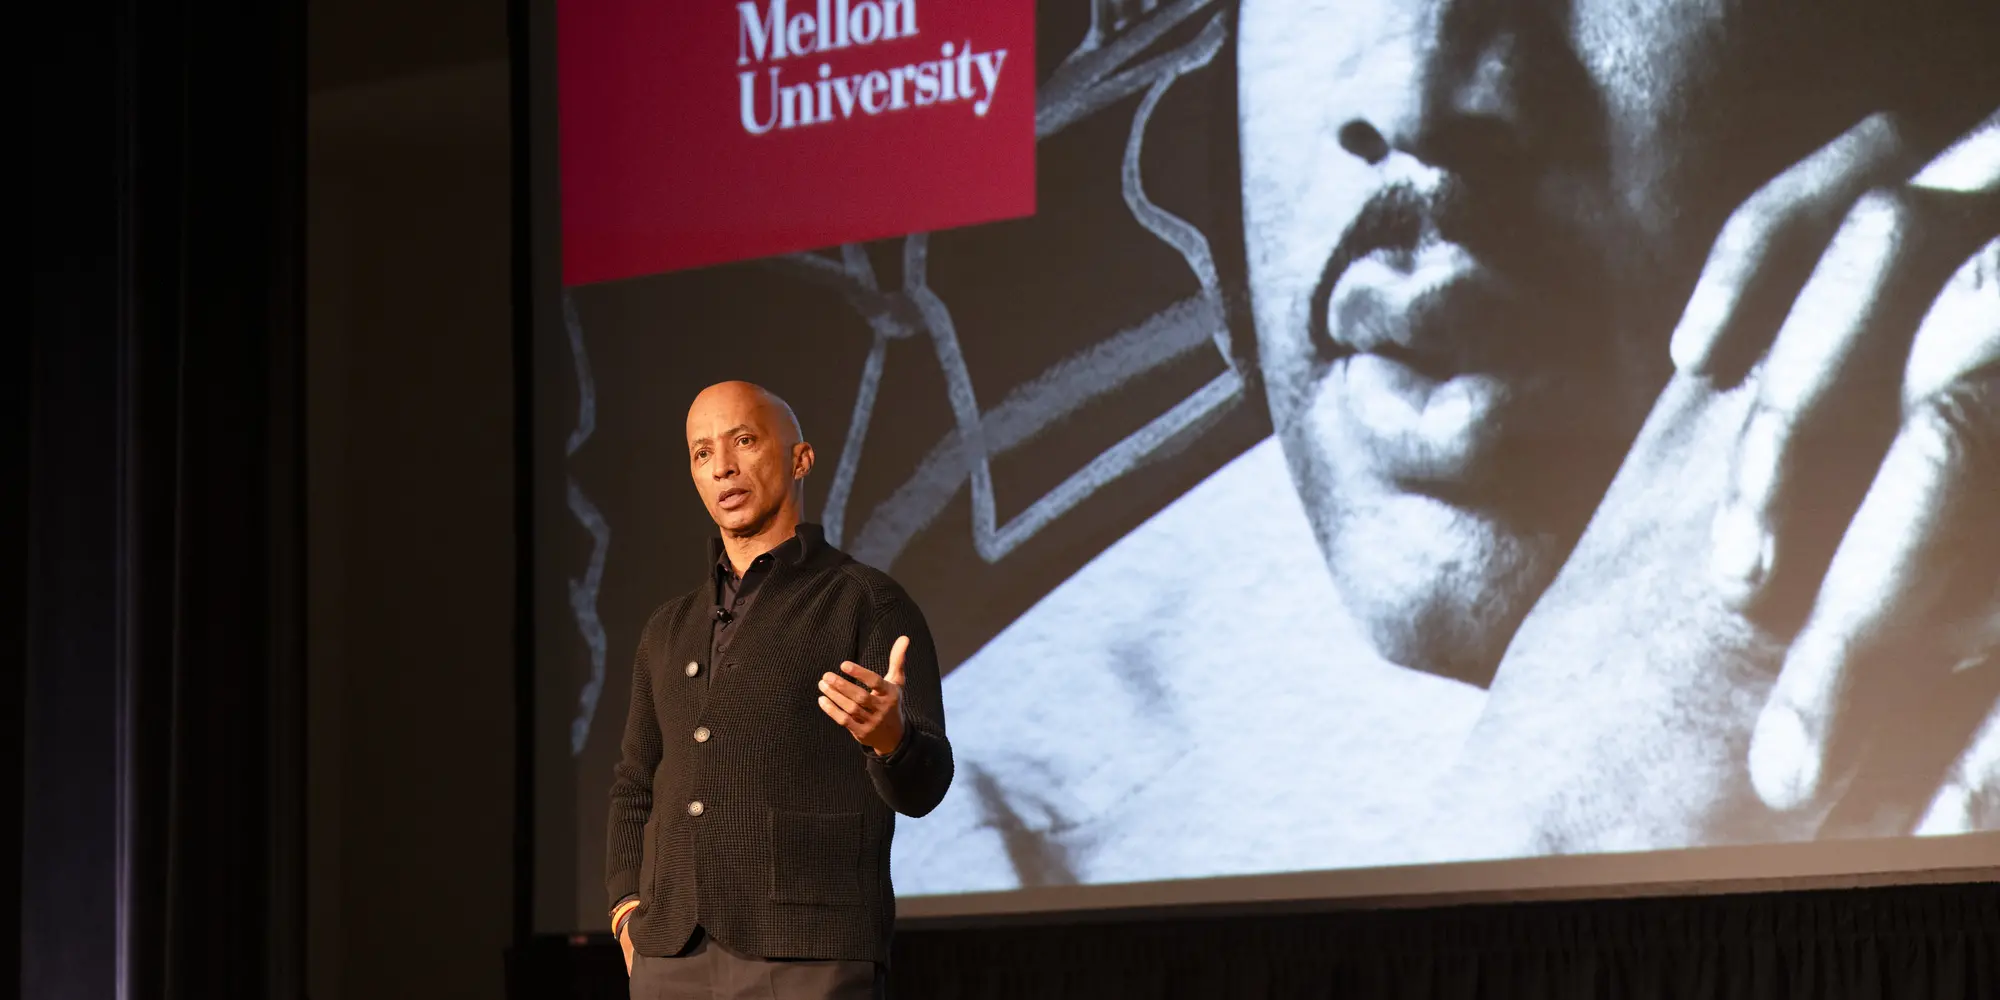 Byron Pitts on stage in front of big screen displaying image of MLK and CMU logo